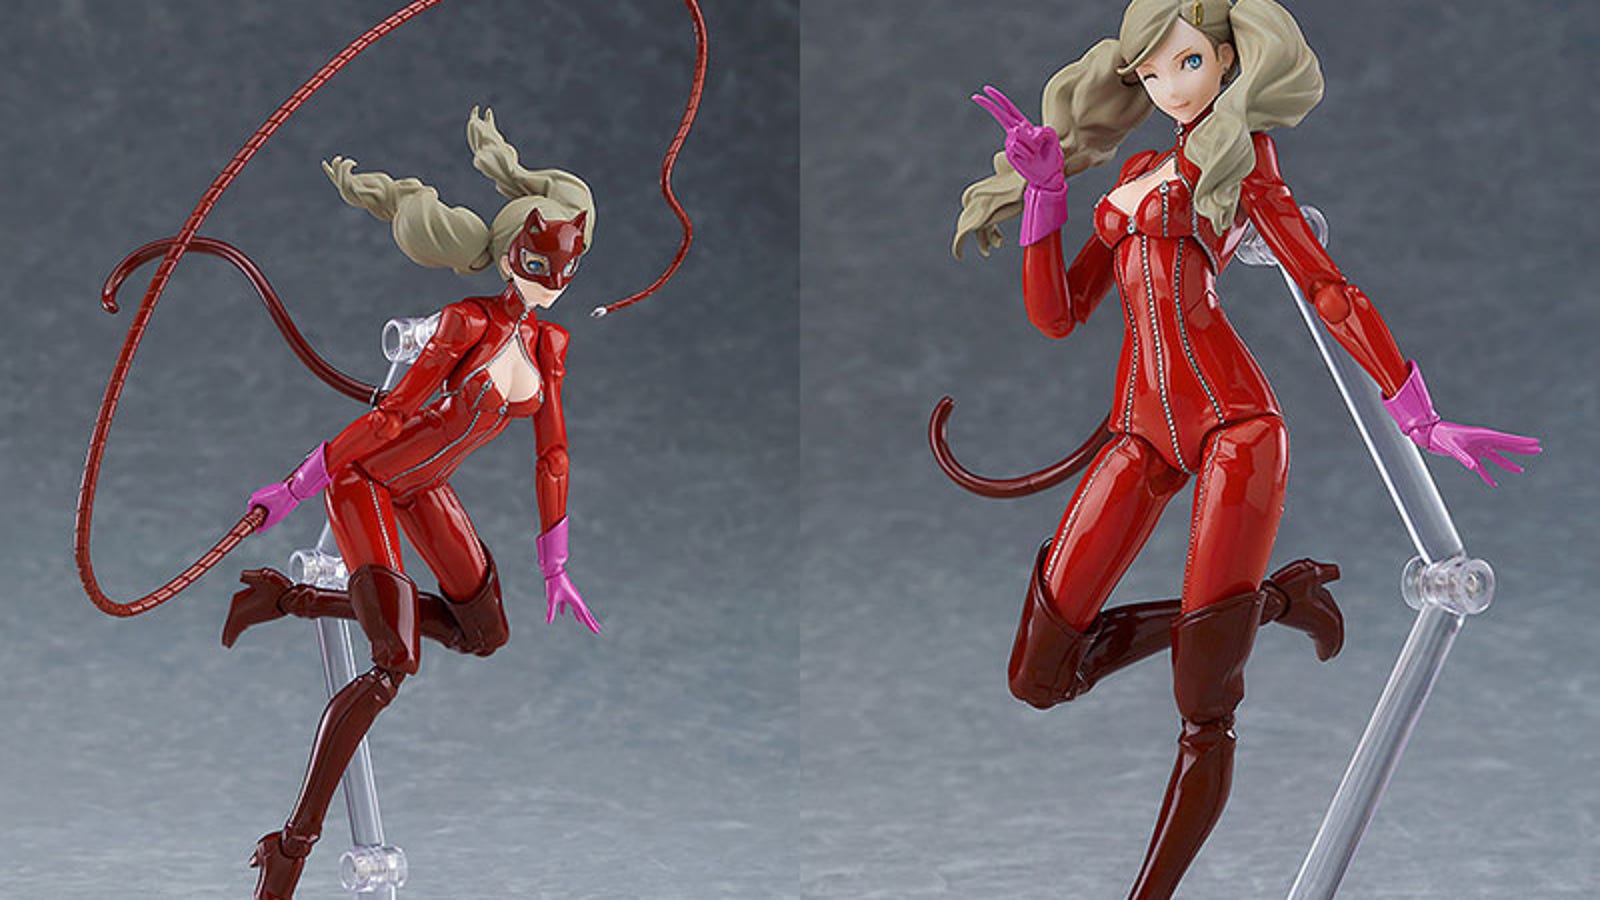 Oh Man This Persona 5 Figure1600 x 900